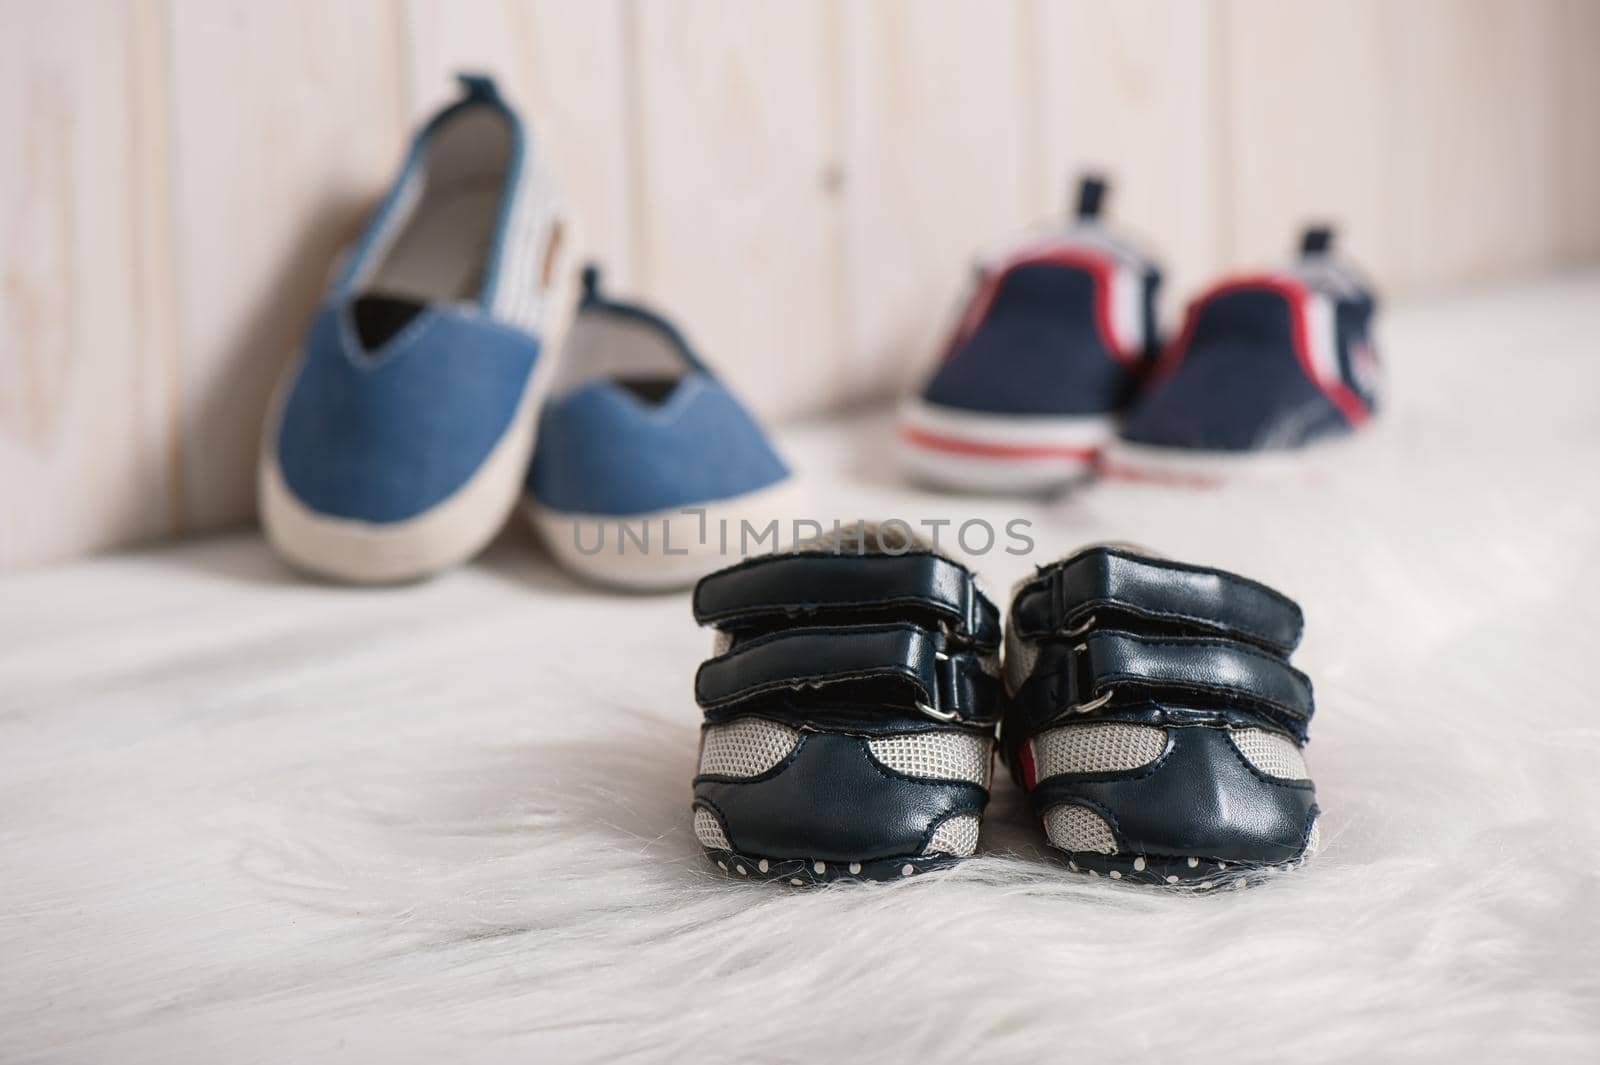 little blue shoes for baby with toys, baby clothing, baby accessories